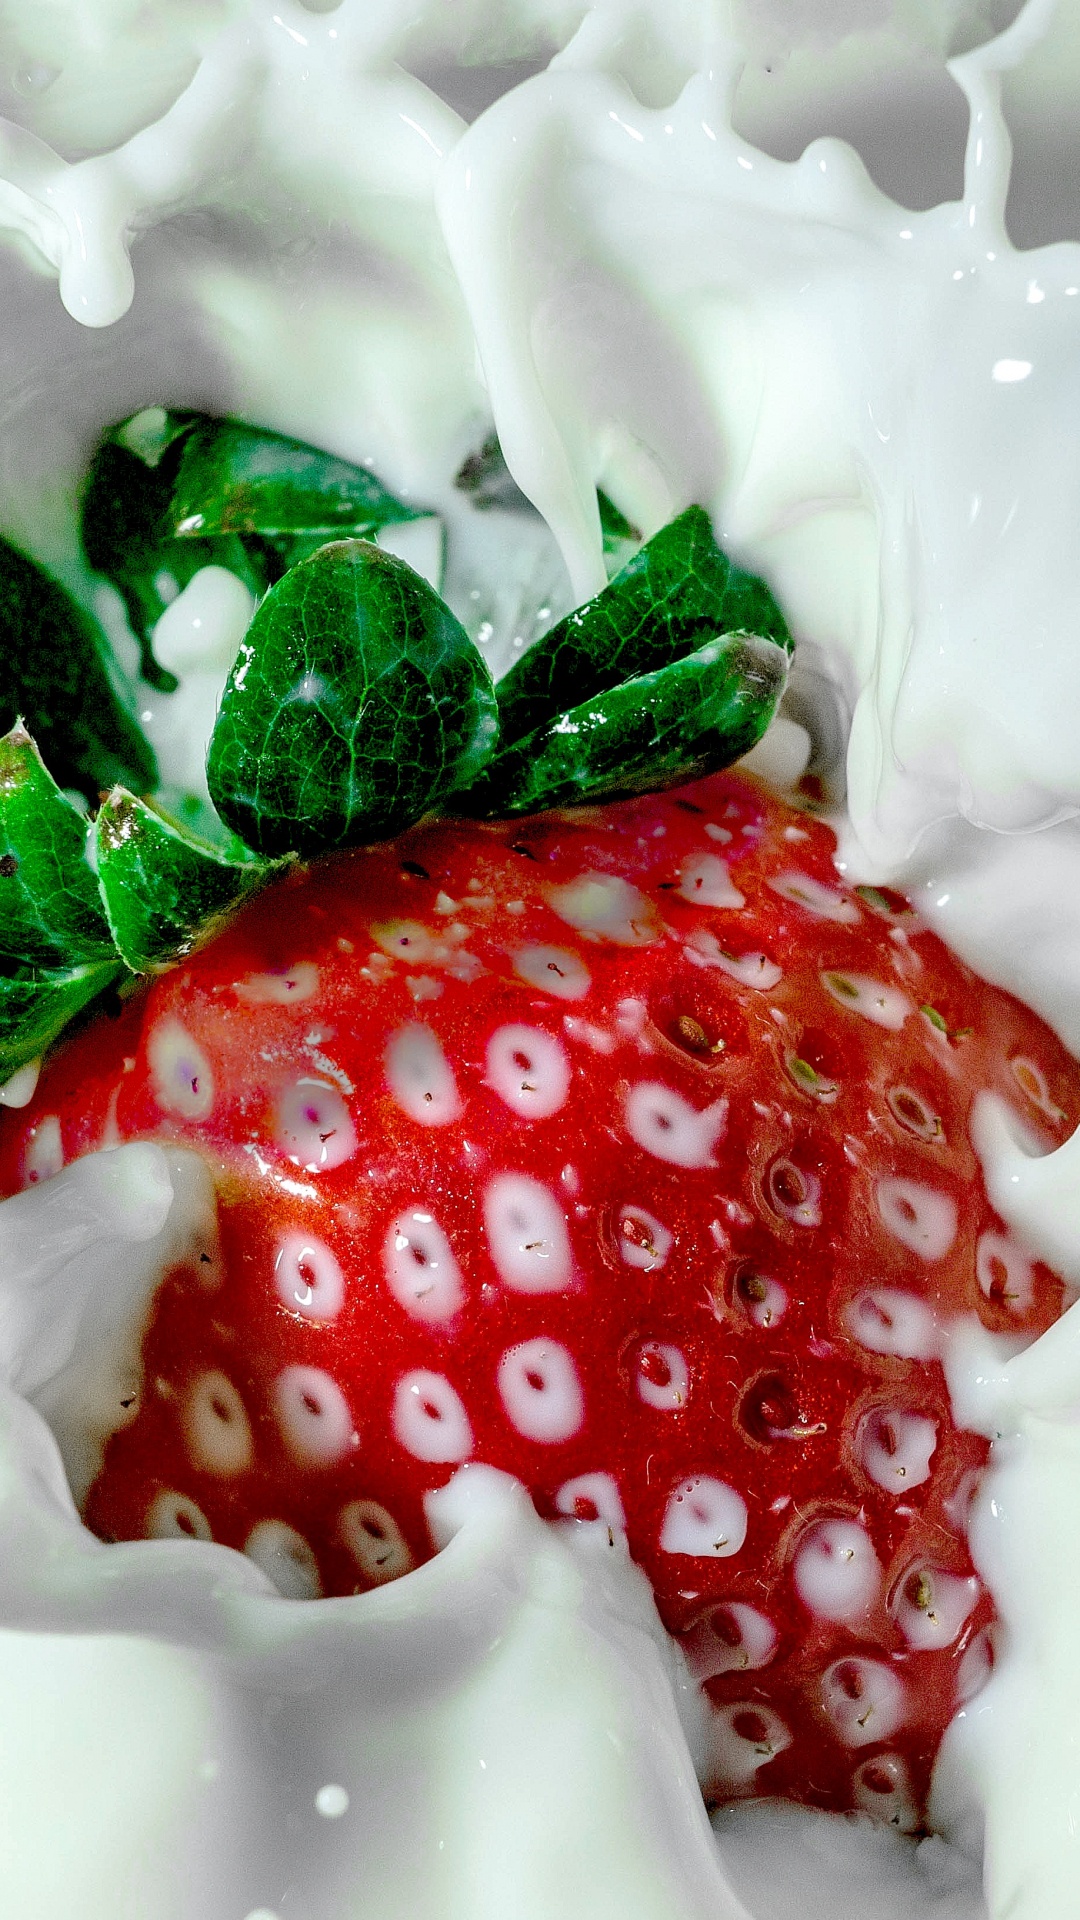 Strawberry on White Ceramic Plate. Wallpaper in 1080x1920 Resolution